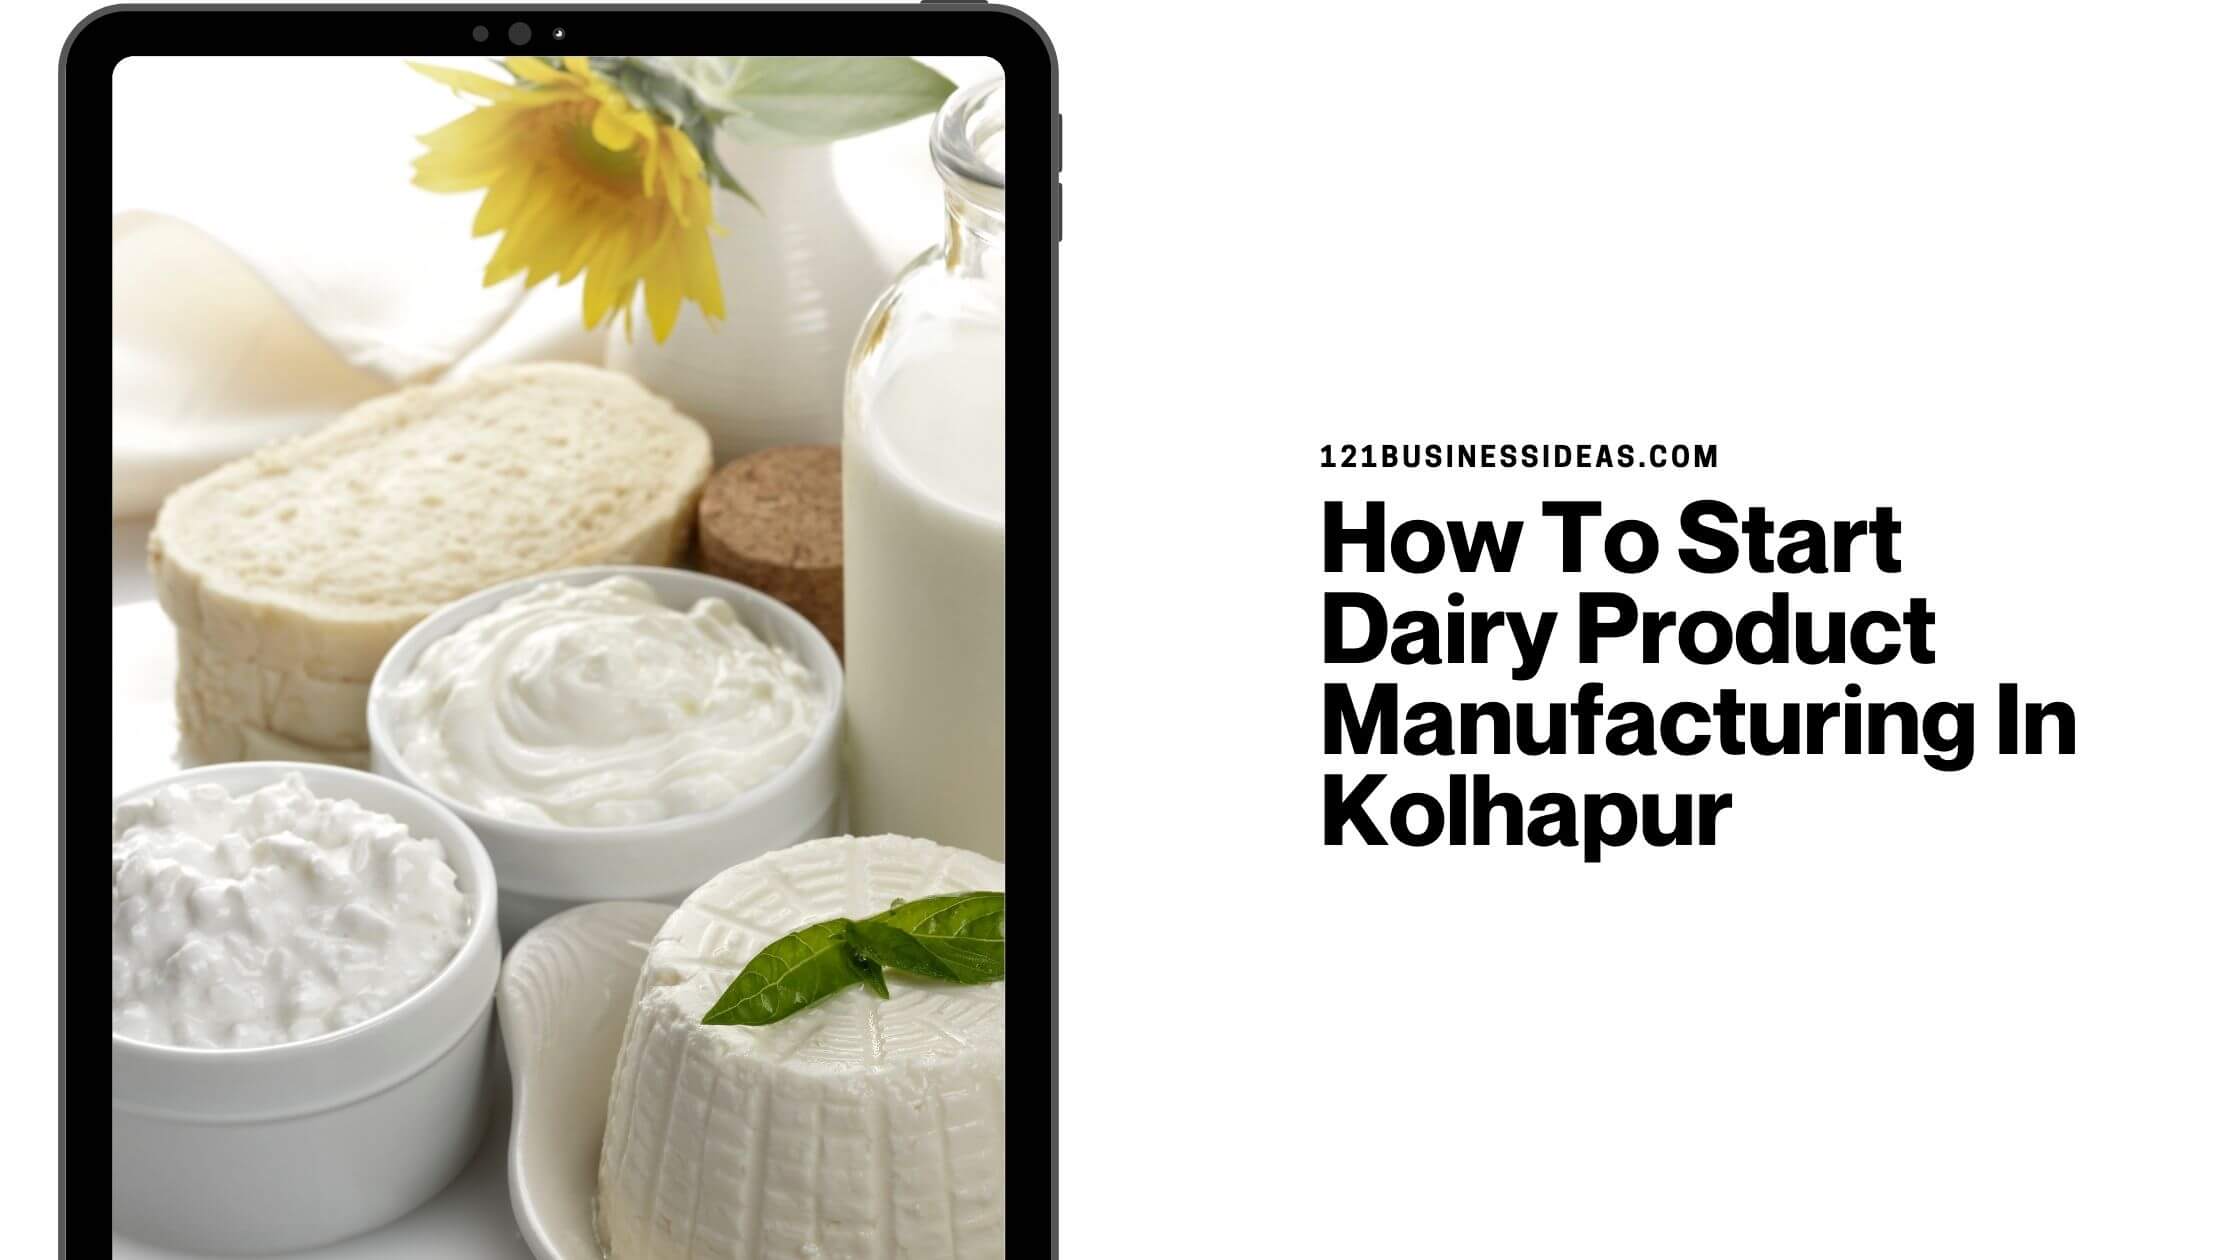 How To Start Dairy Product Manufacturing In Kolhapur 2